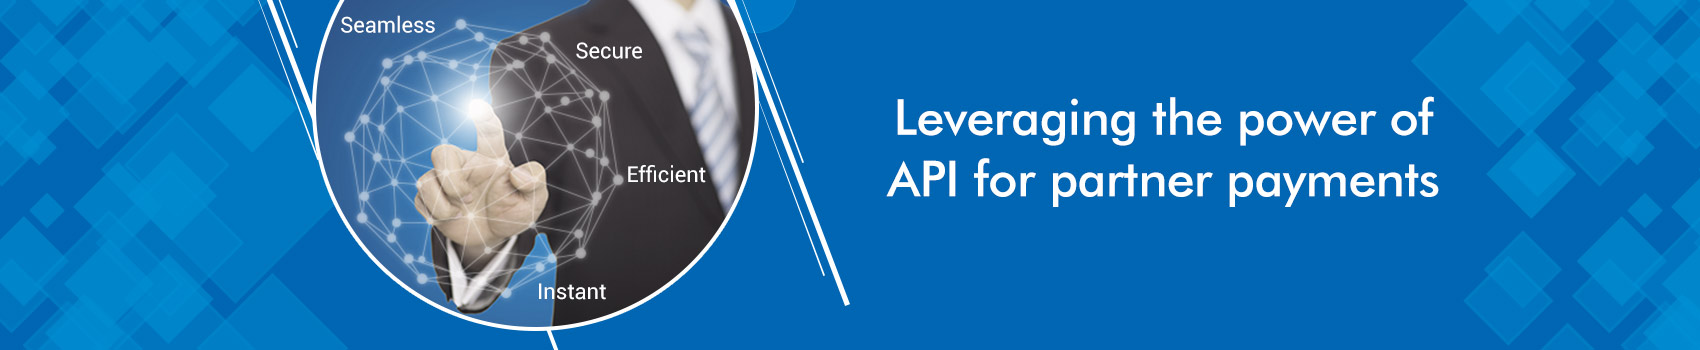 Leveraging the power of API for partner payments